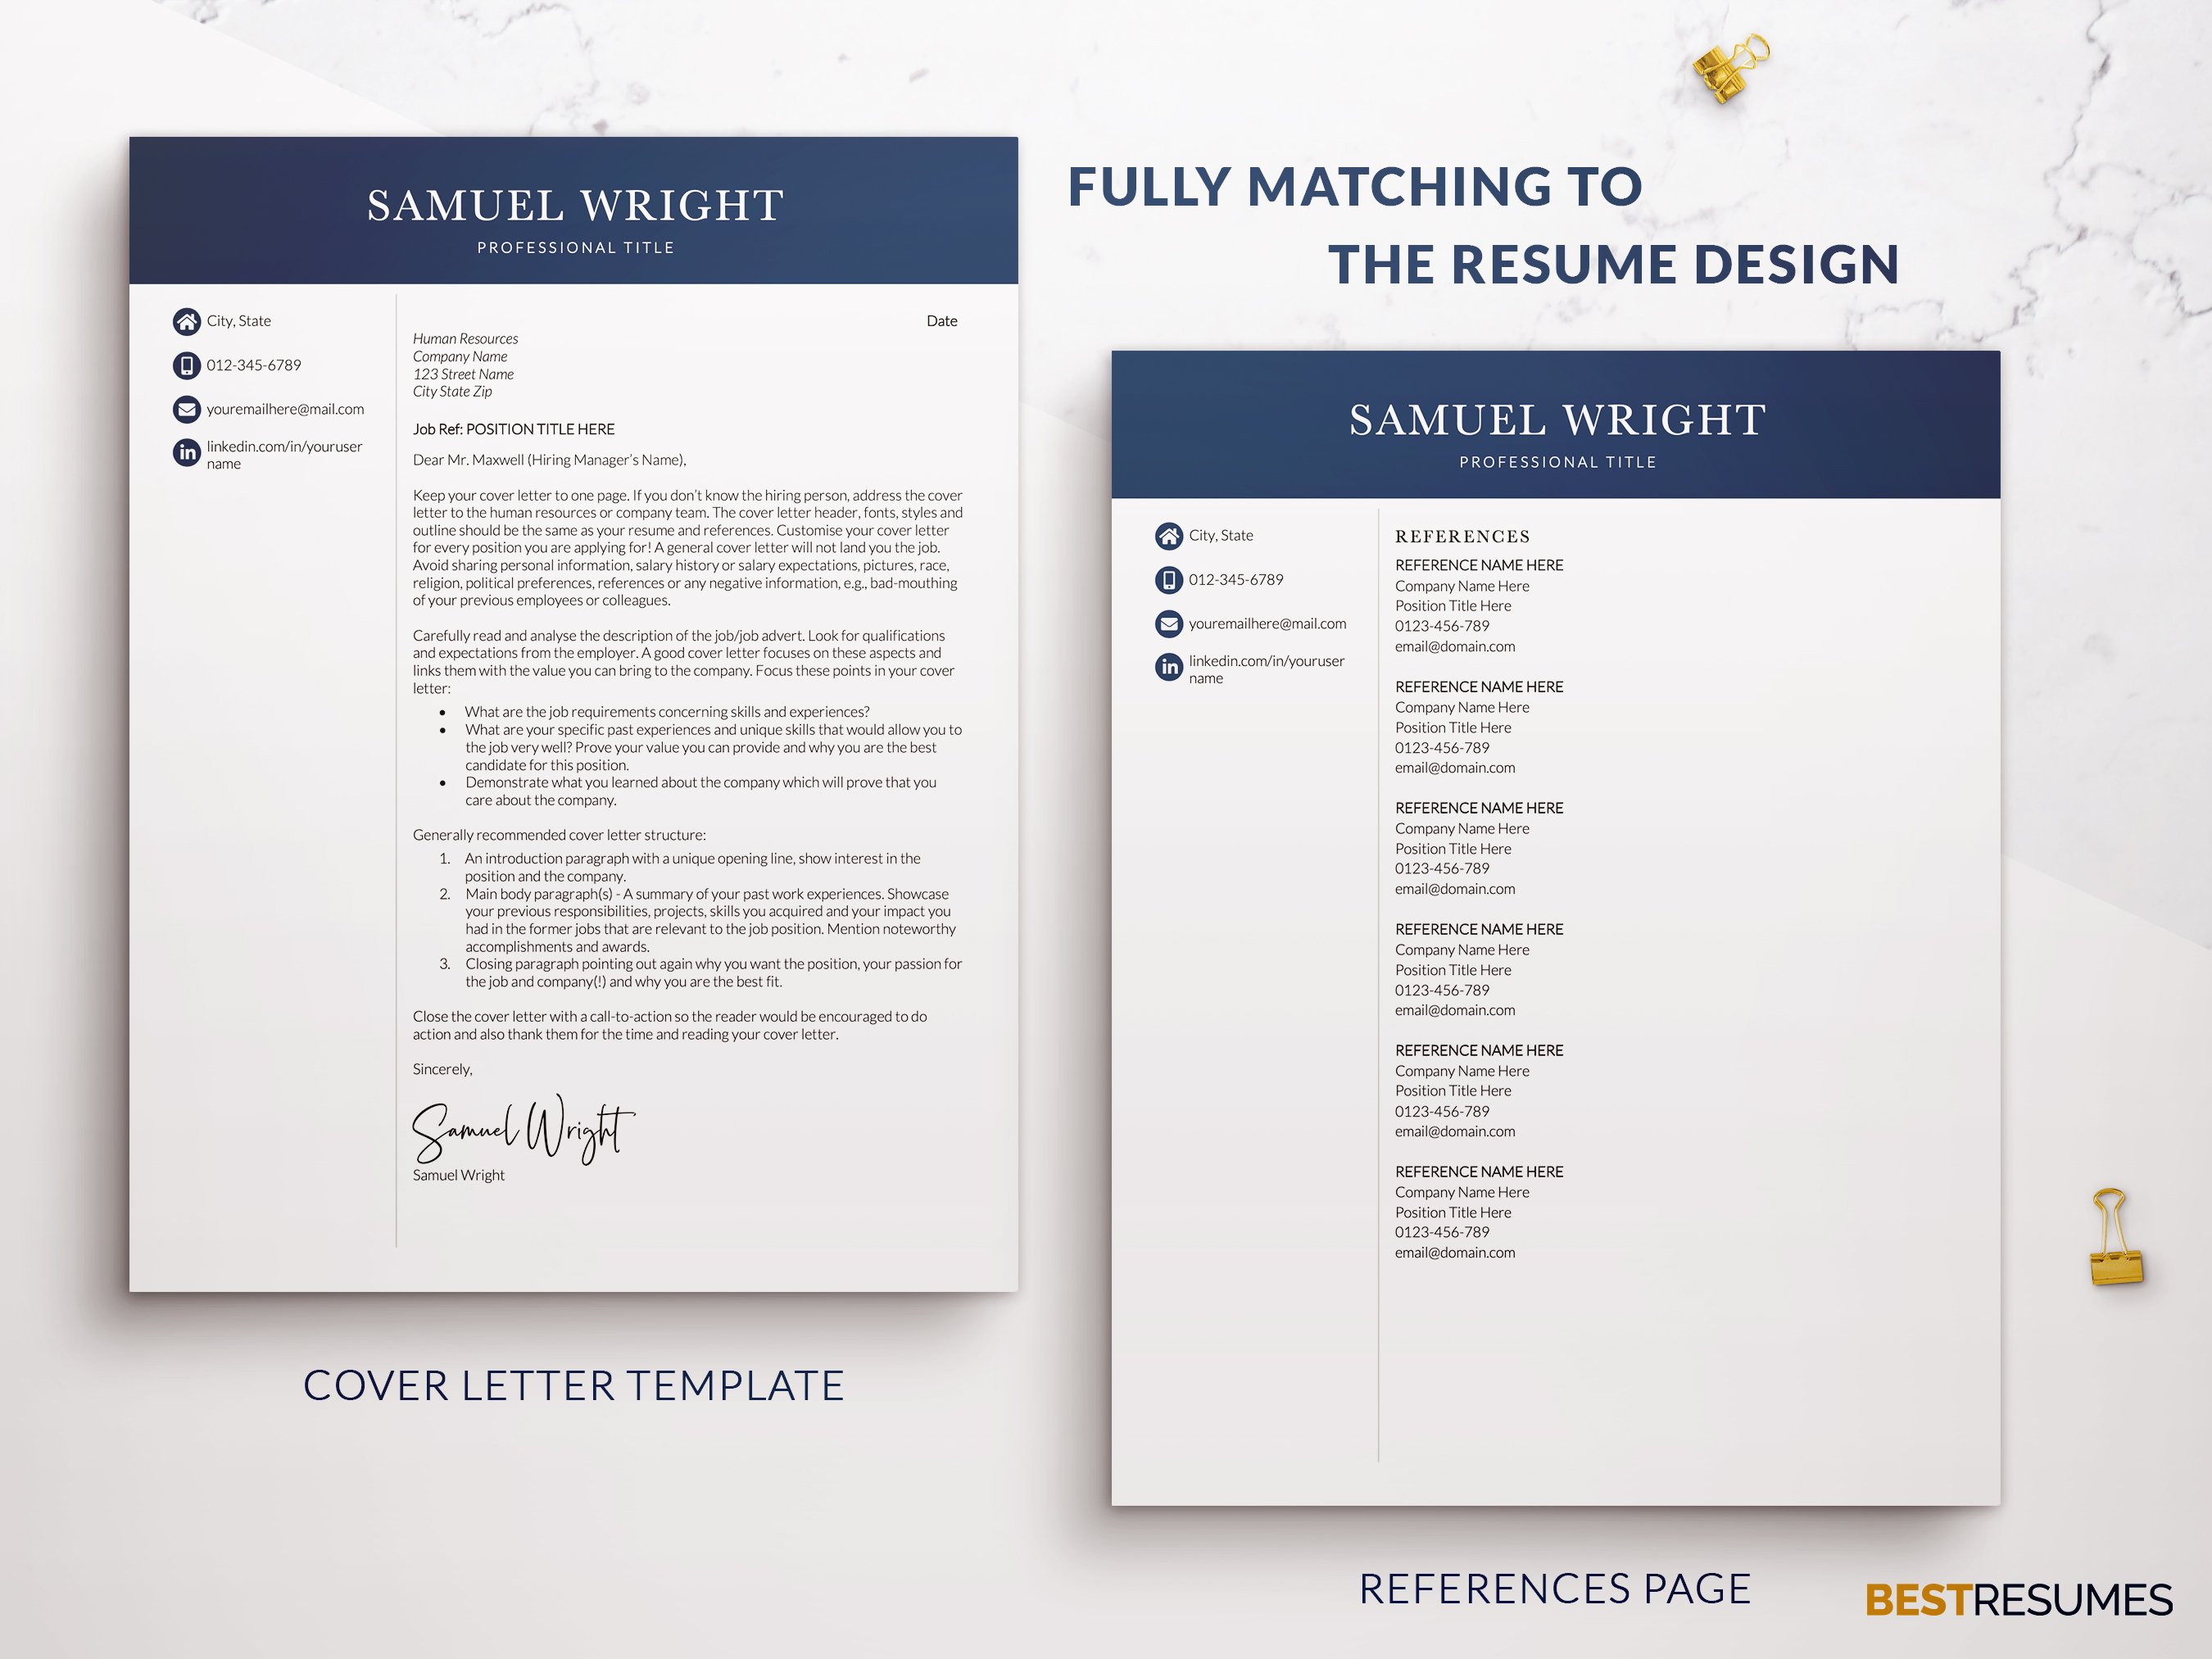 executive resume template cover letter references samuel wright 383